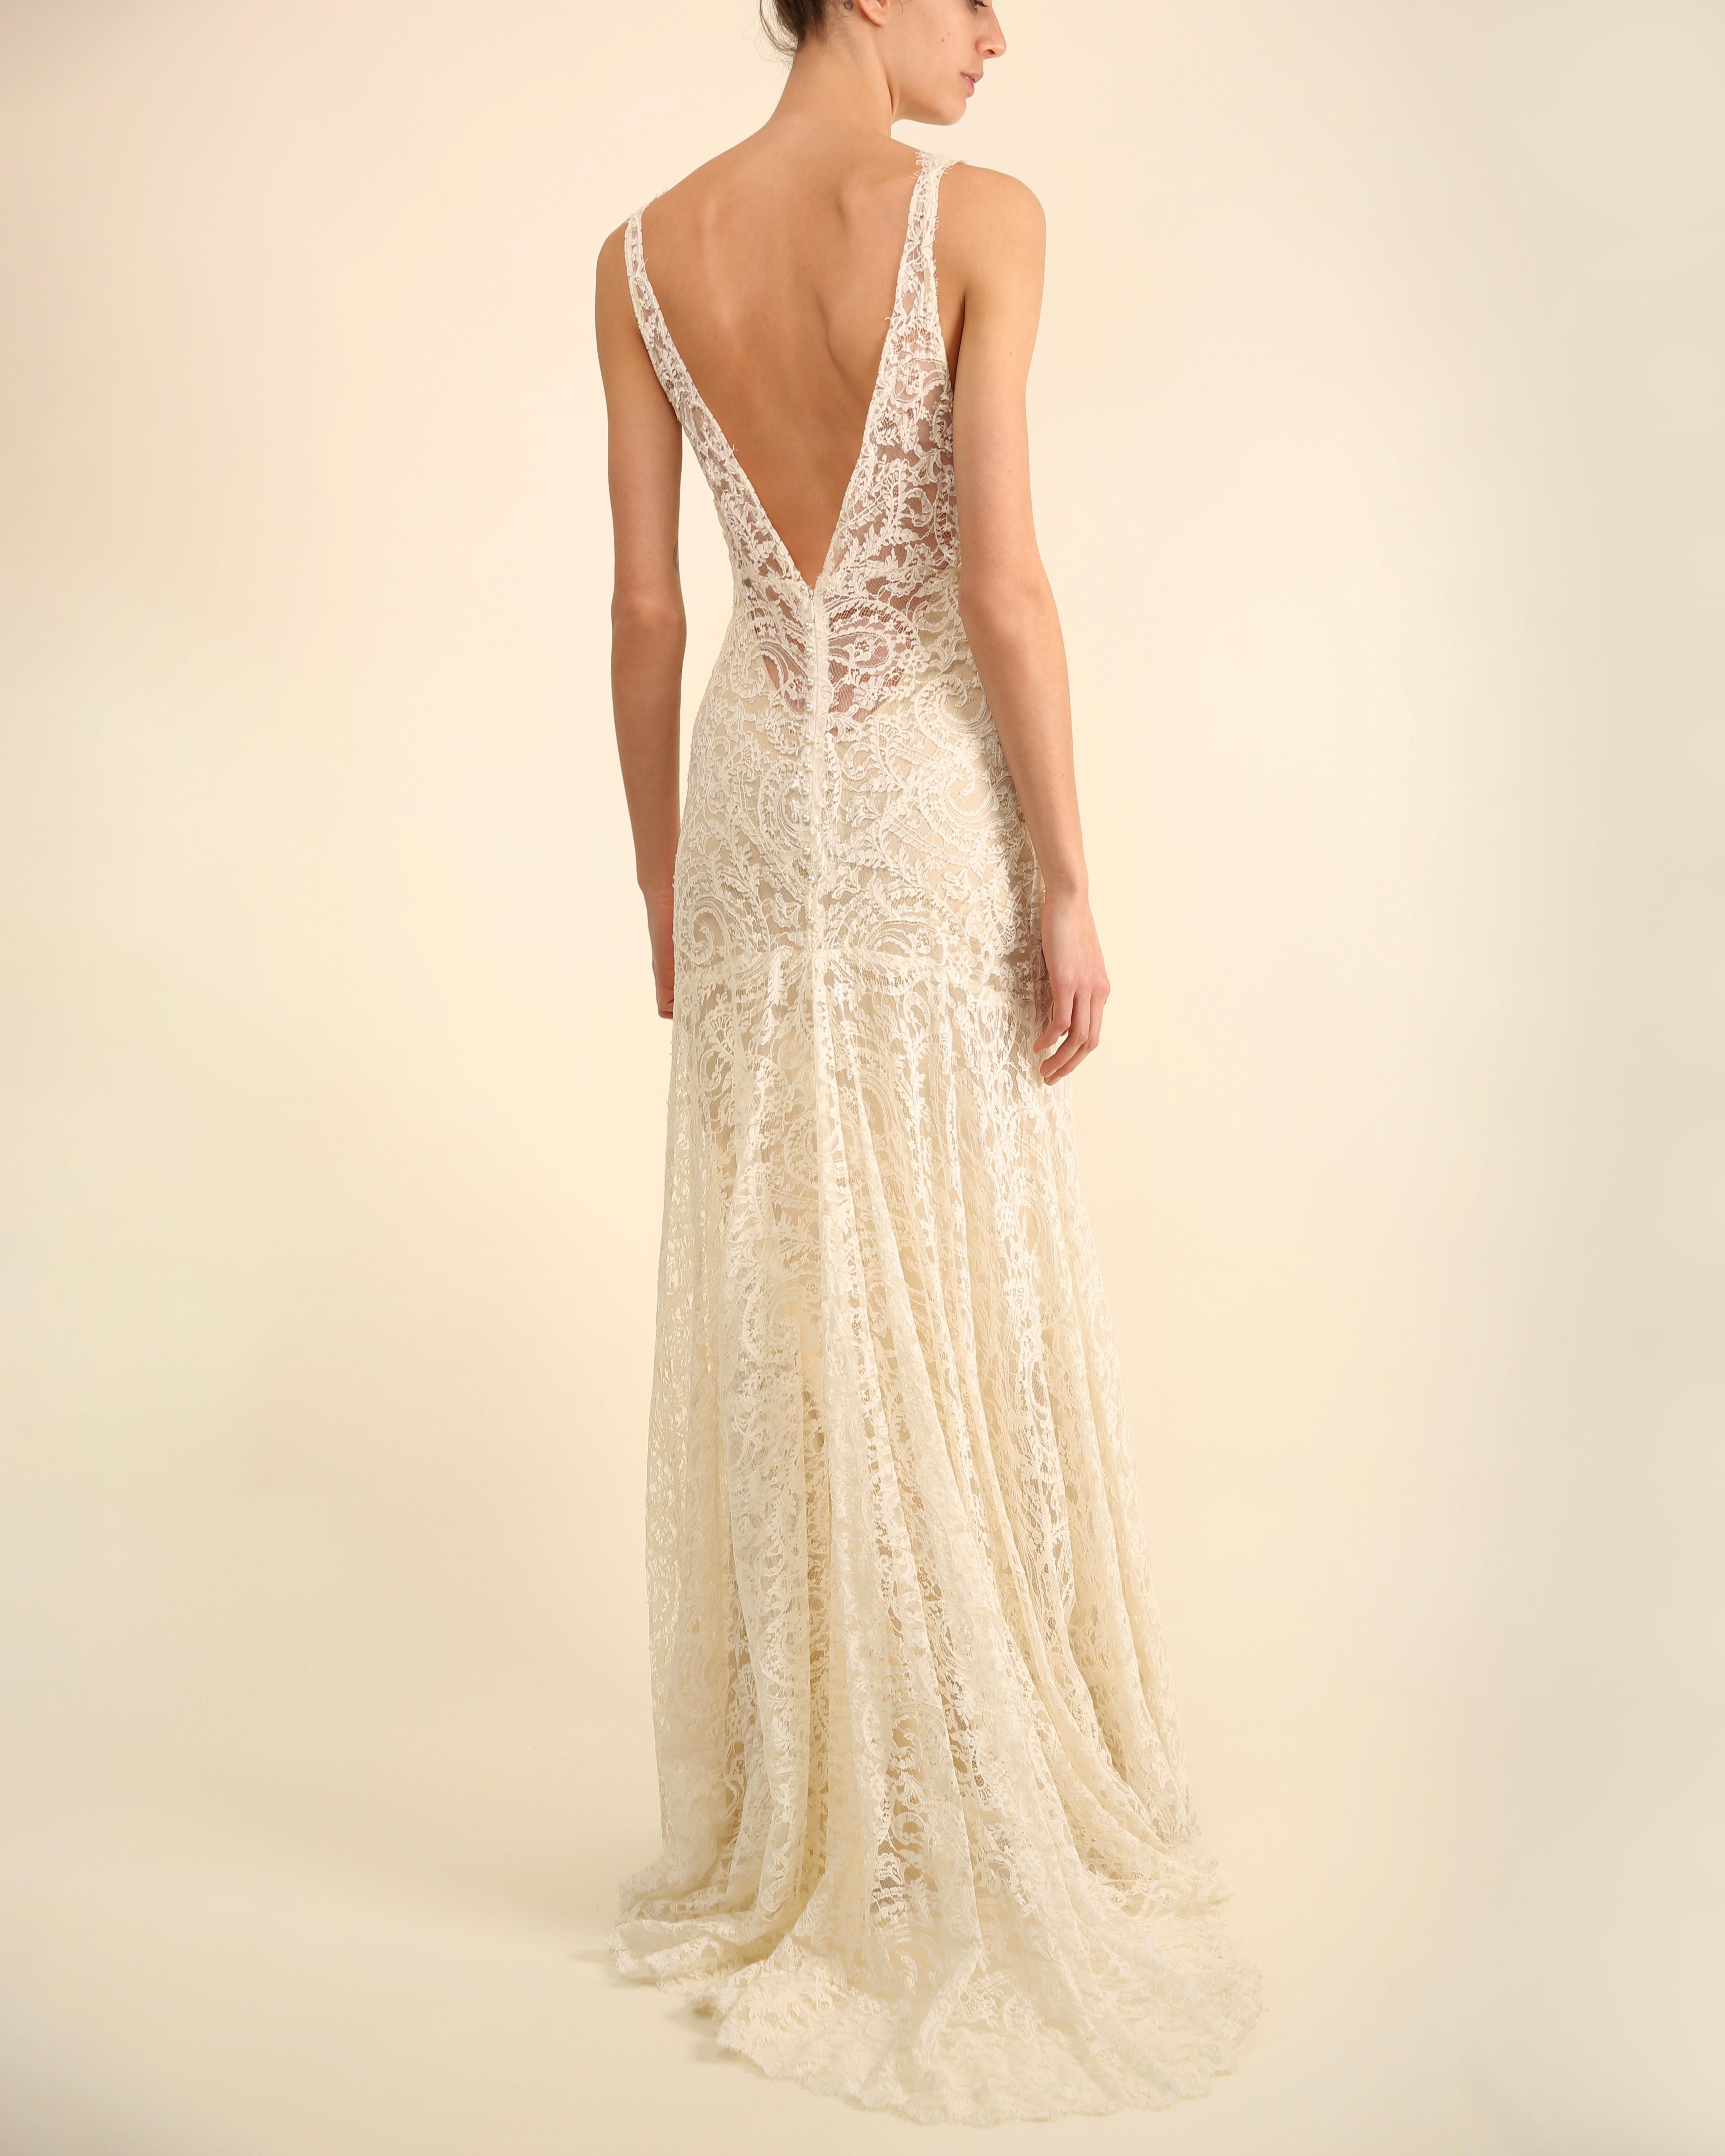 Monique Lhuillier ivory lace plunging backless wedding gown with train dress  12